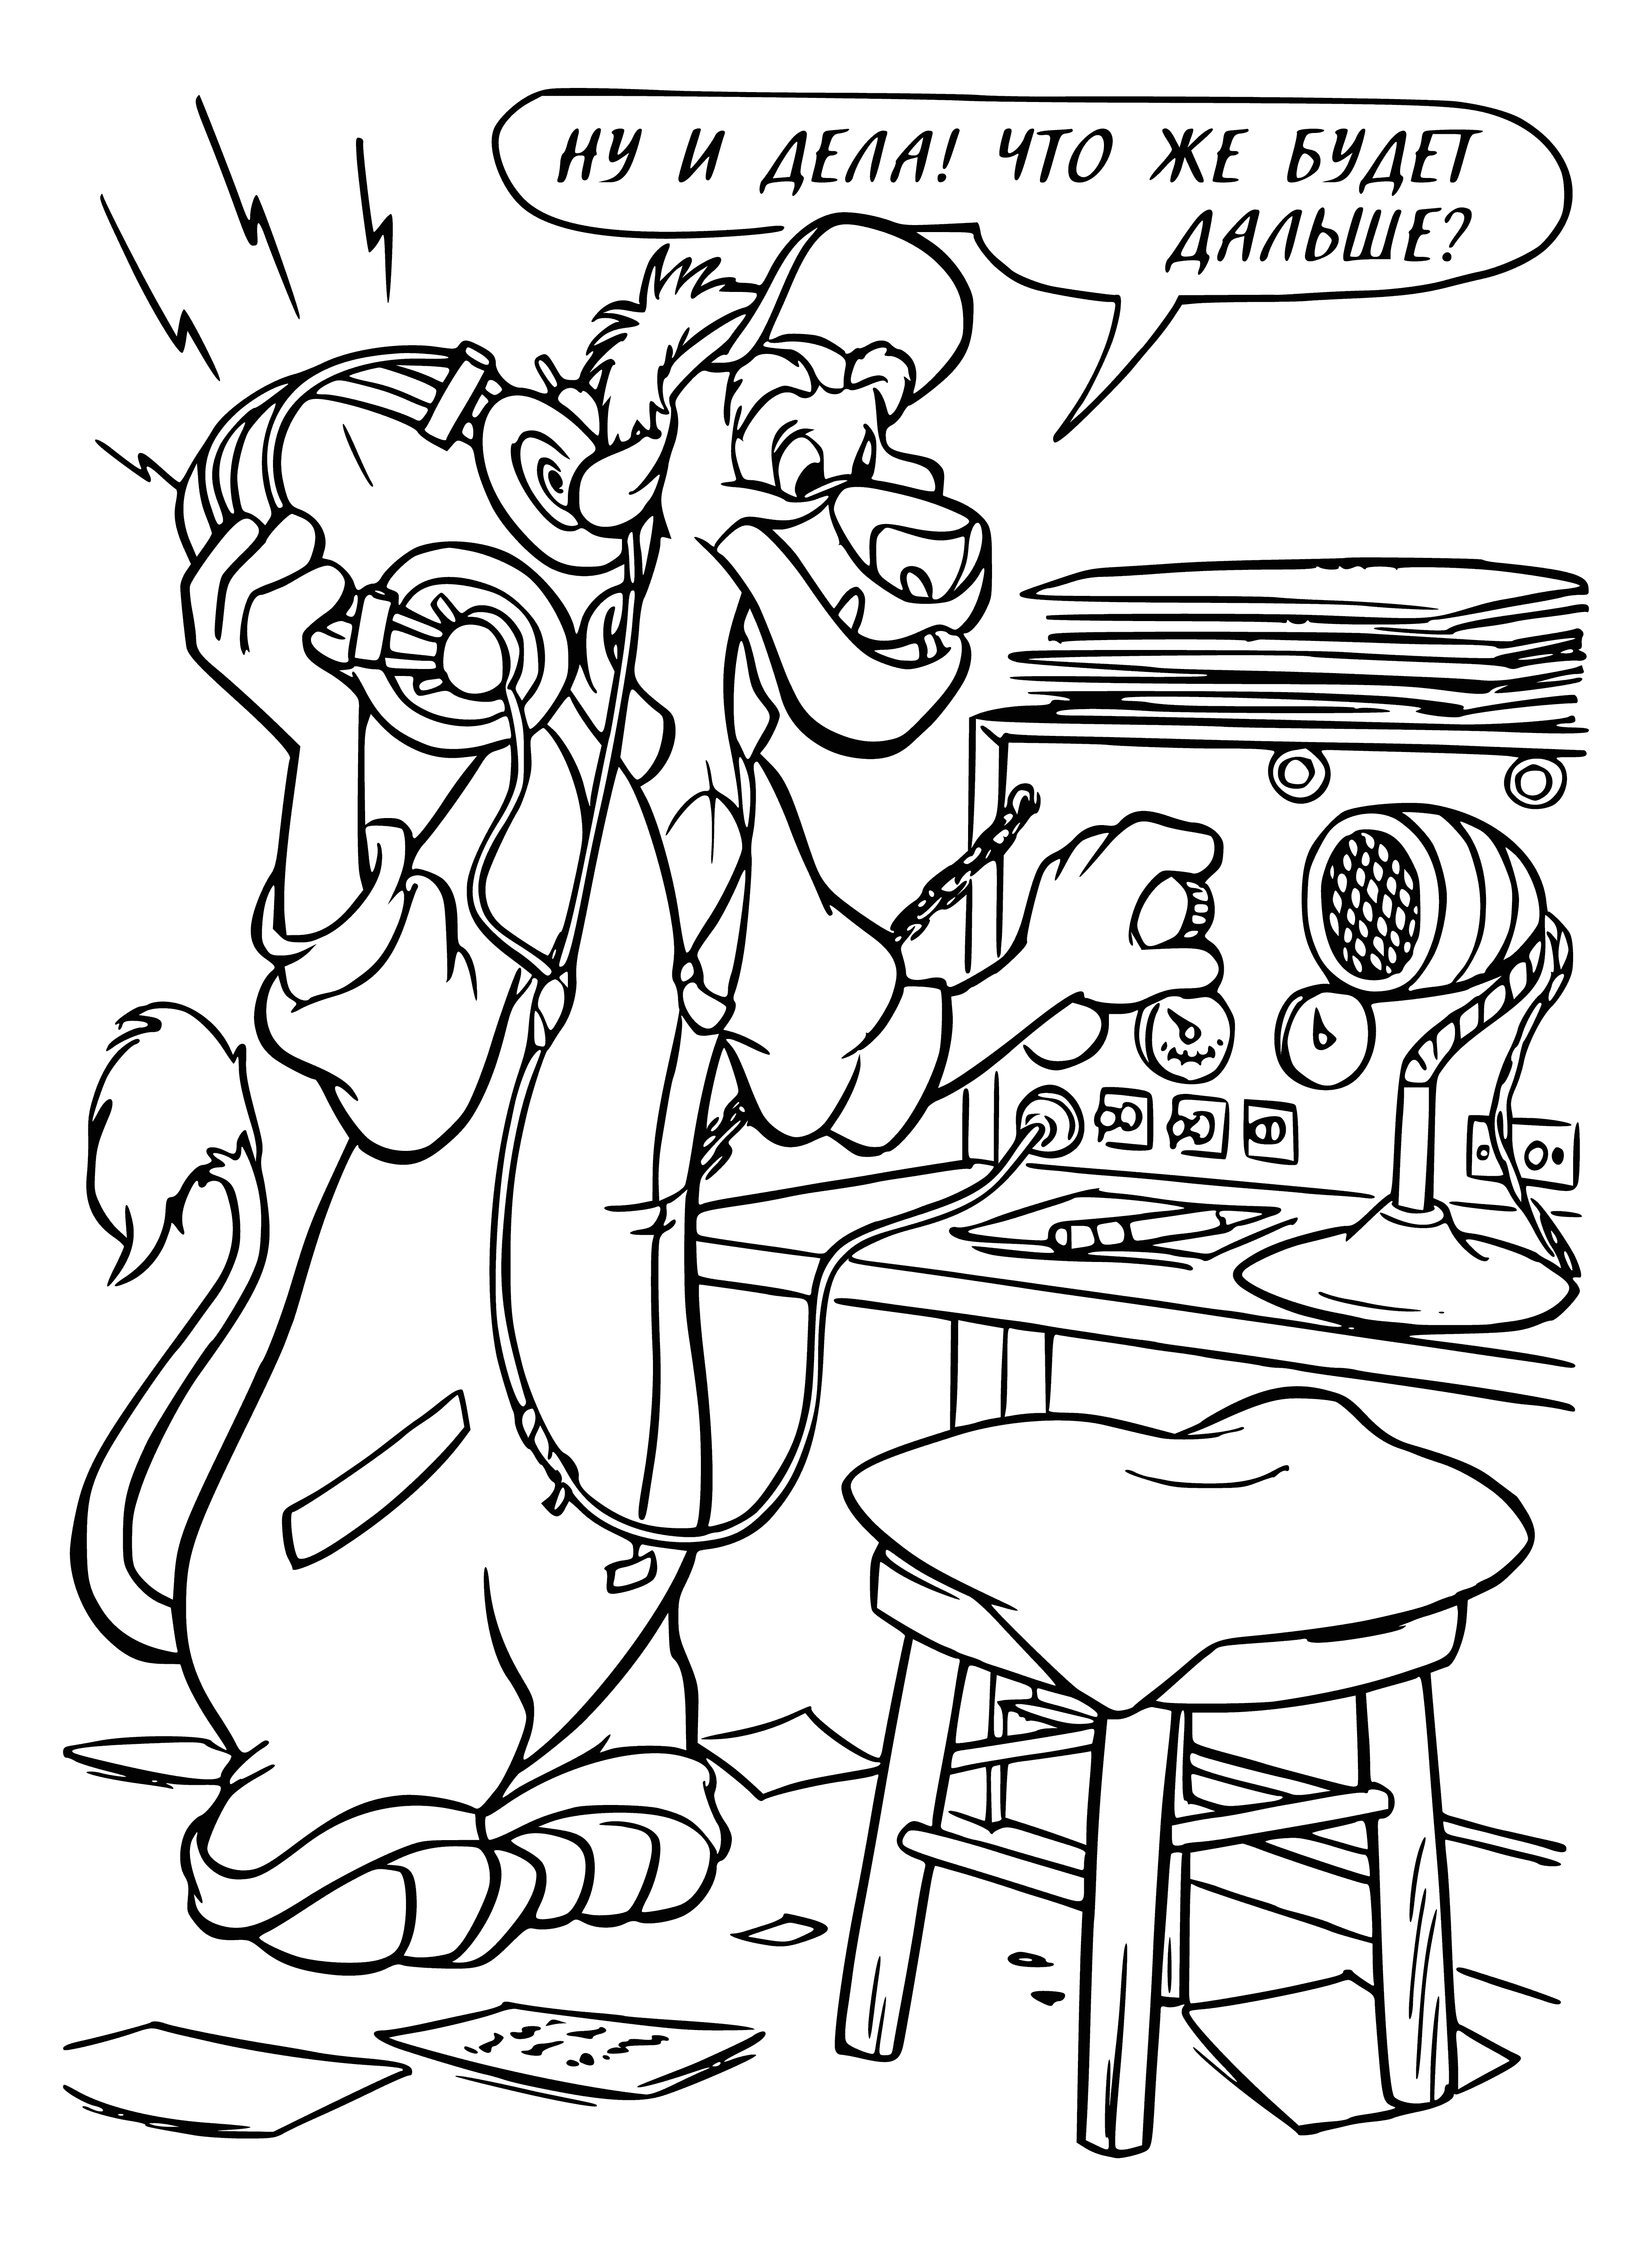 coloring page: Balamut lies content, eyes closed, head propped on paws, listening to the radio.